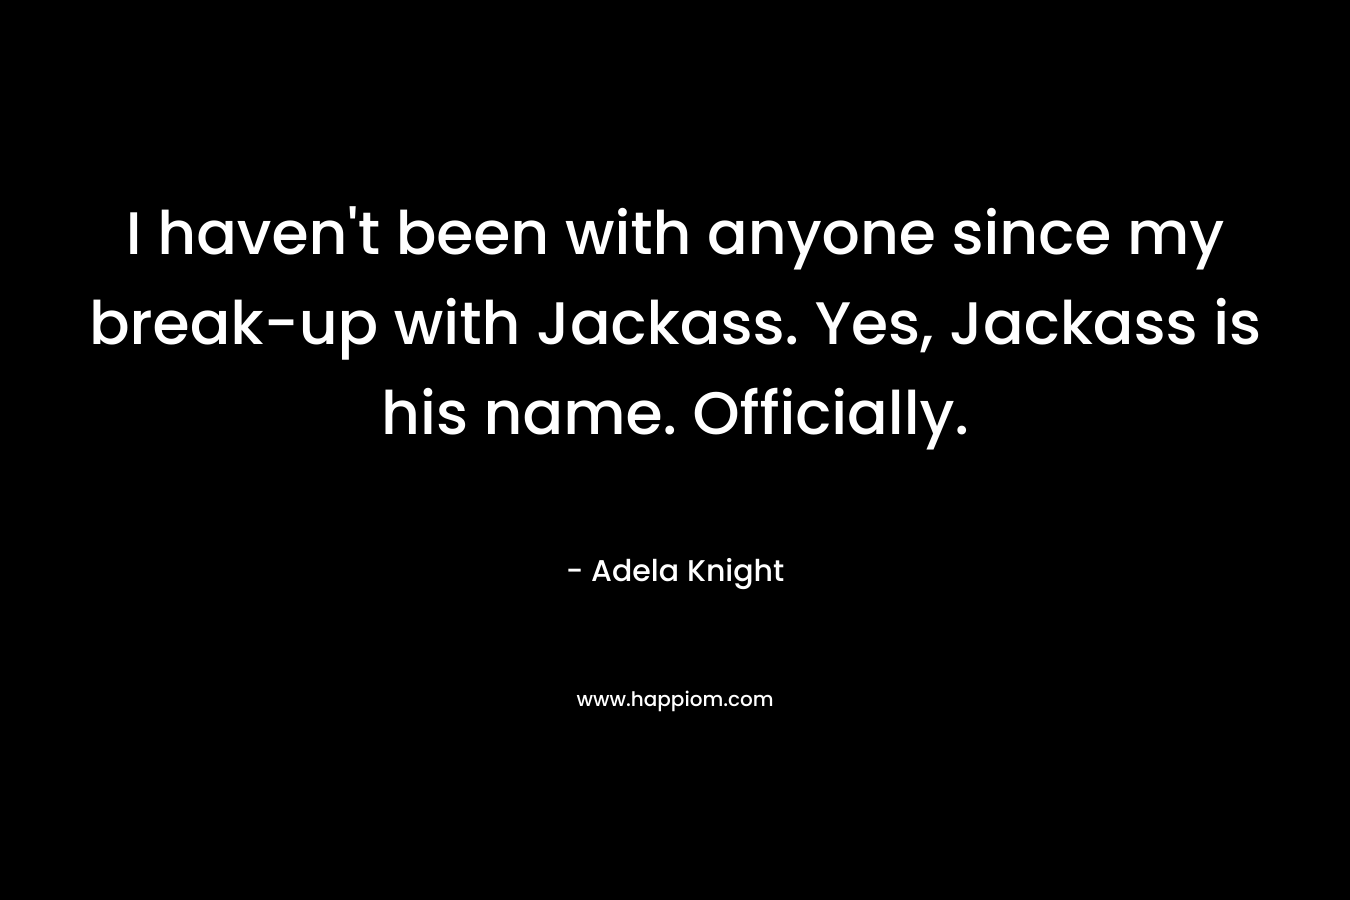 I haven’t been with anyone since my break-up with Jackass. Yes, Jackass is his name. Officially. – Adela Knight